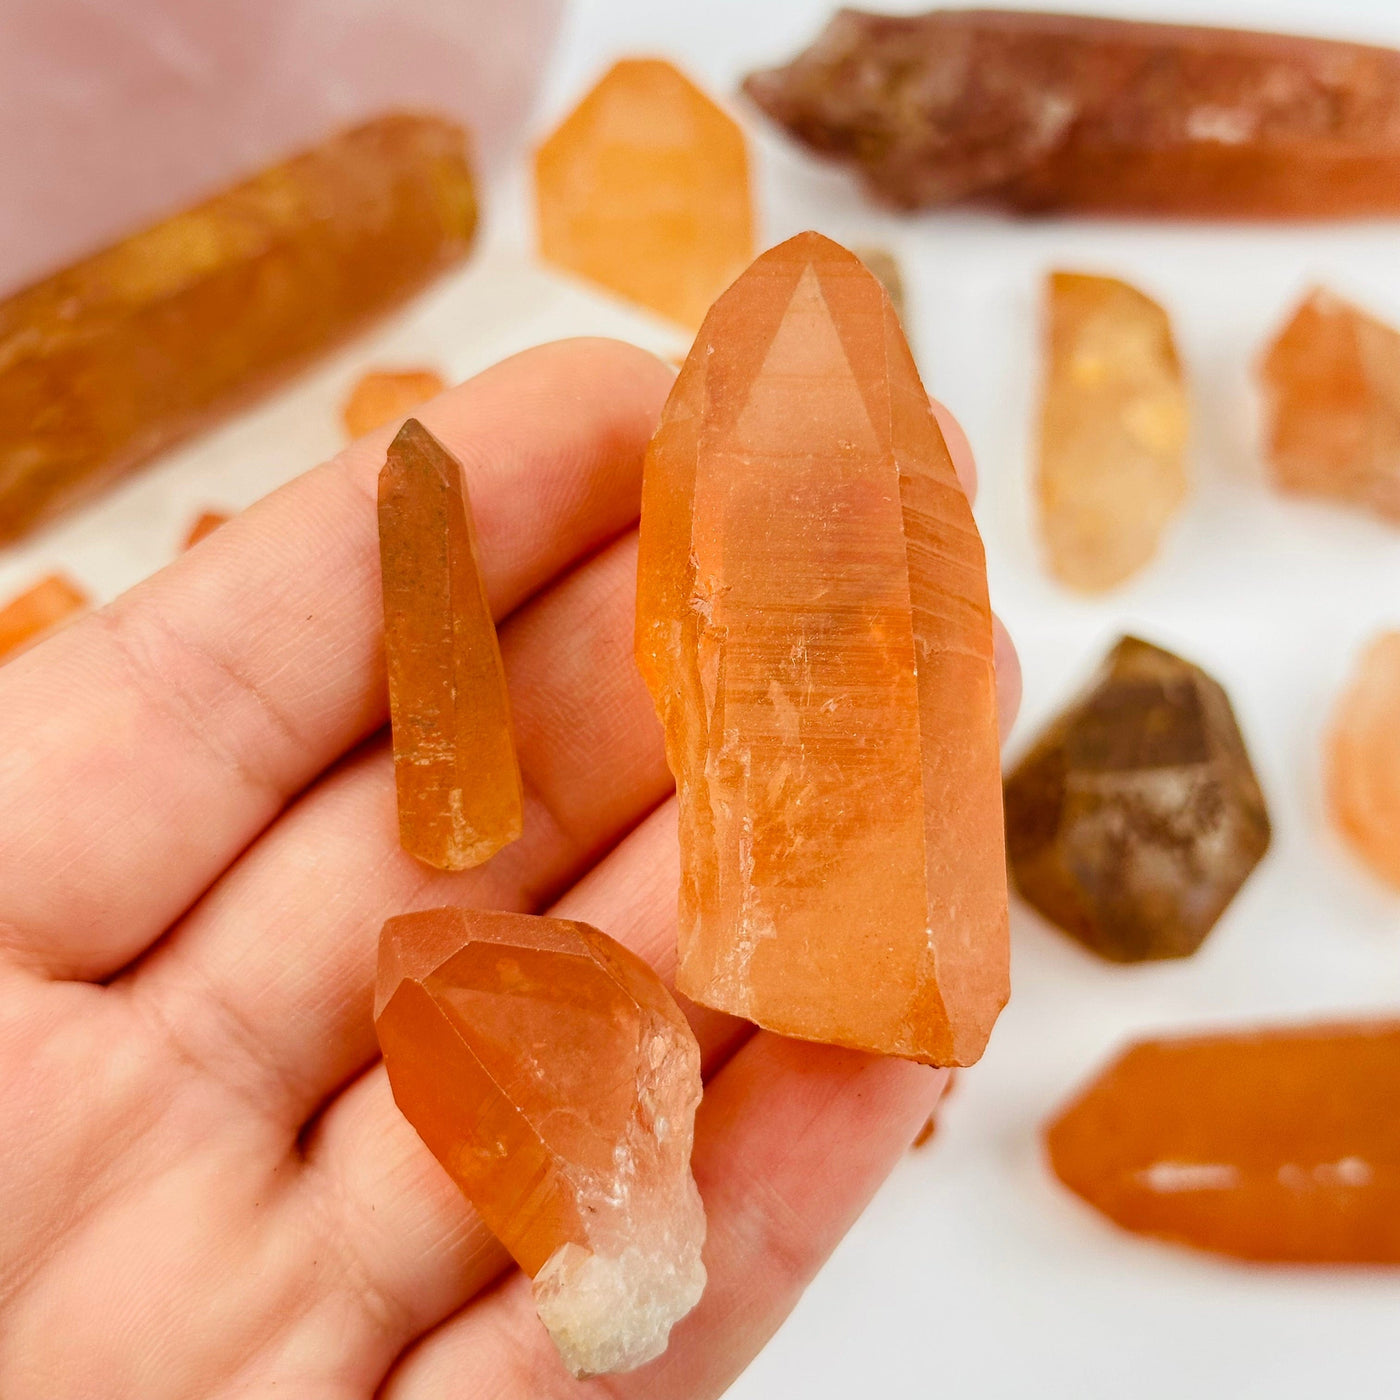 Lemurian Tangerine Quartz Points in hand for size reference 